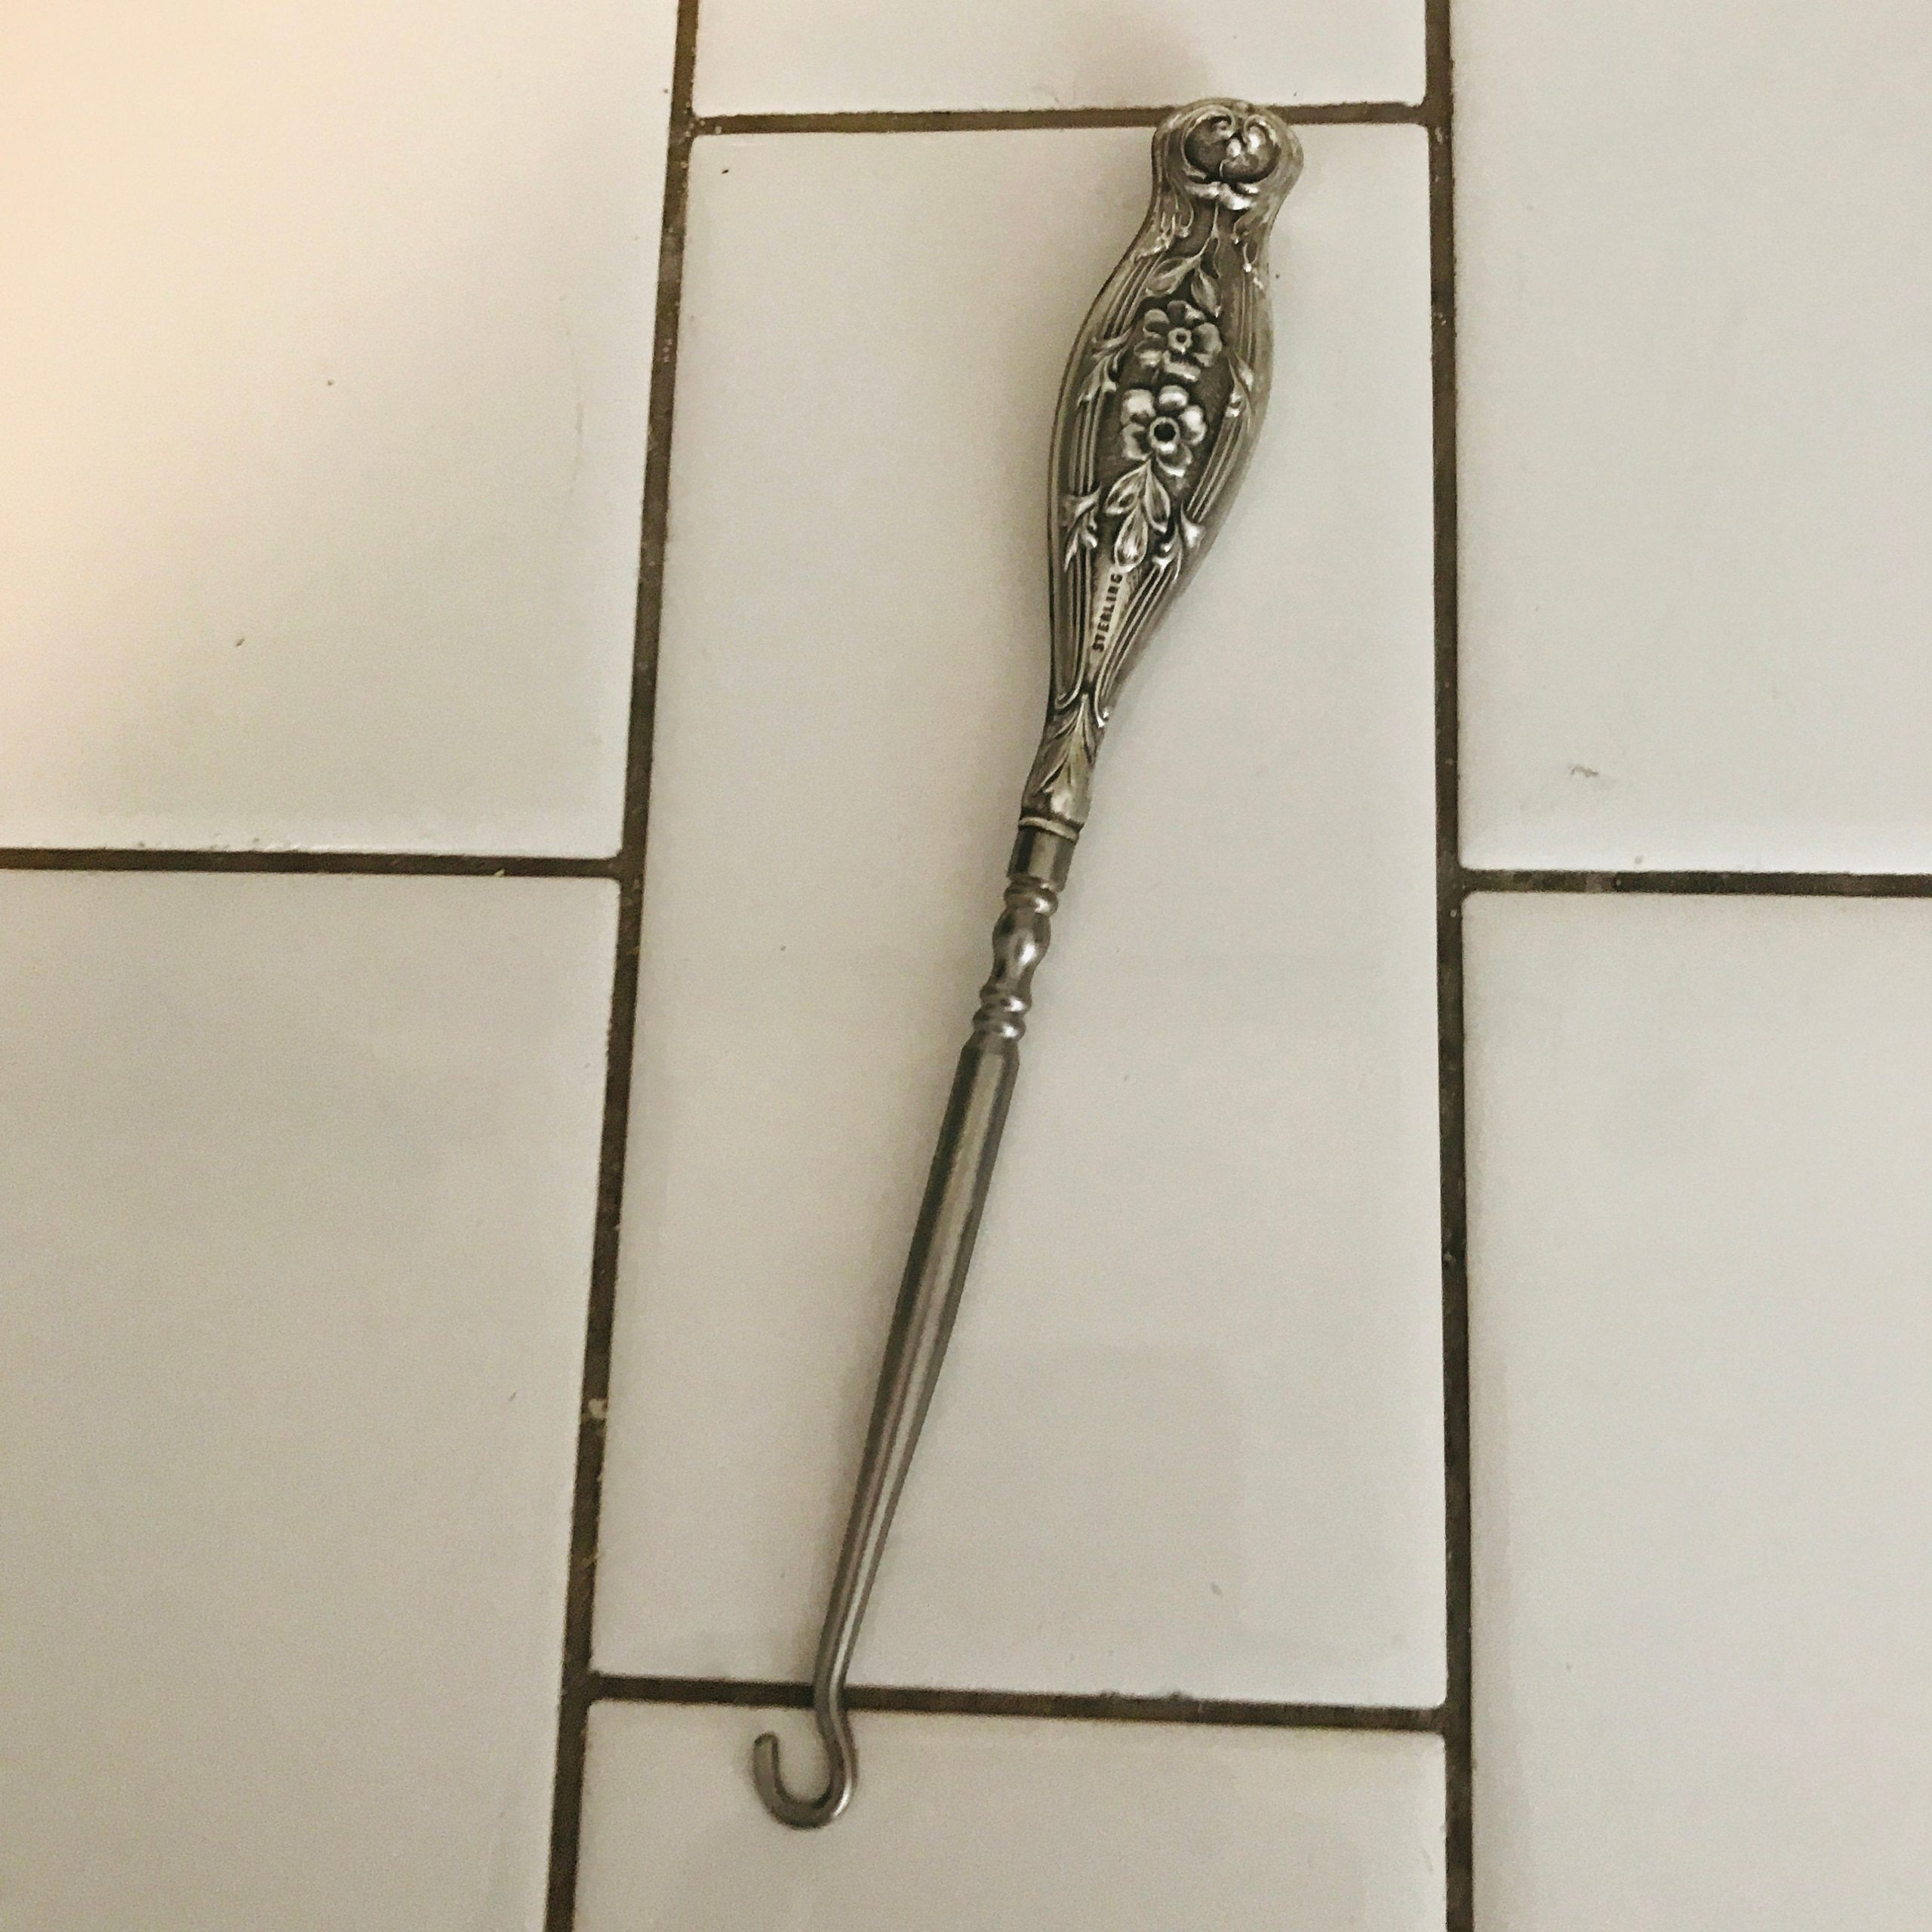 https://www.truevintageantiques.com/wp-content/uploads/2020/06/antique-sterling-silver-shoe-button-hook-collectible-display-ornate-handle-farmhouse-museum-tv-movie-prop-5efbd3522-scaled.jpg